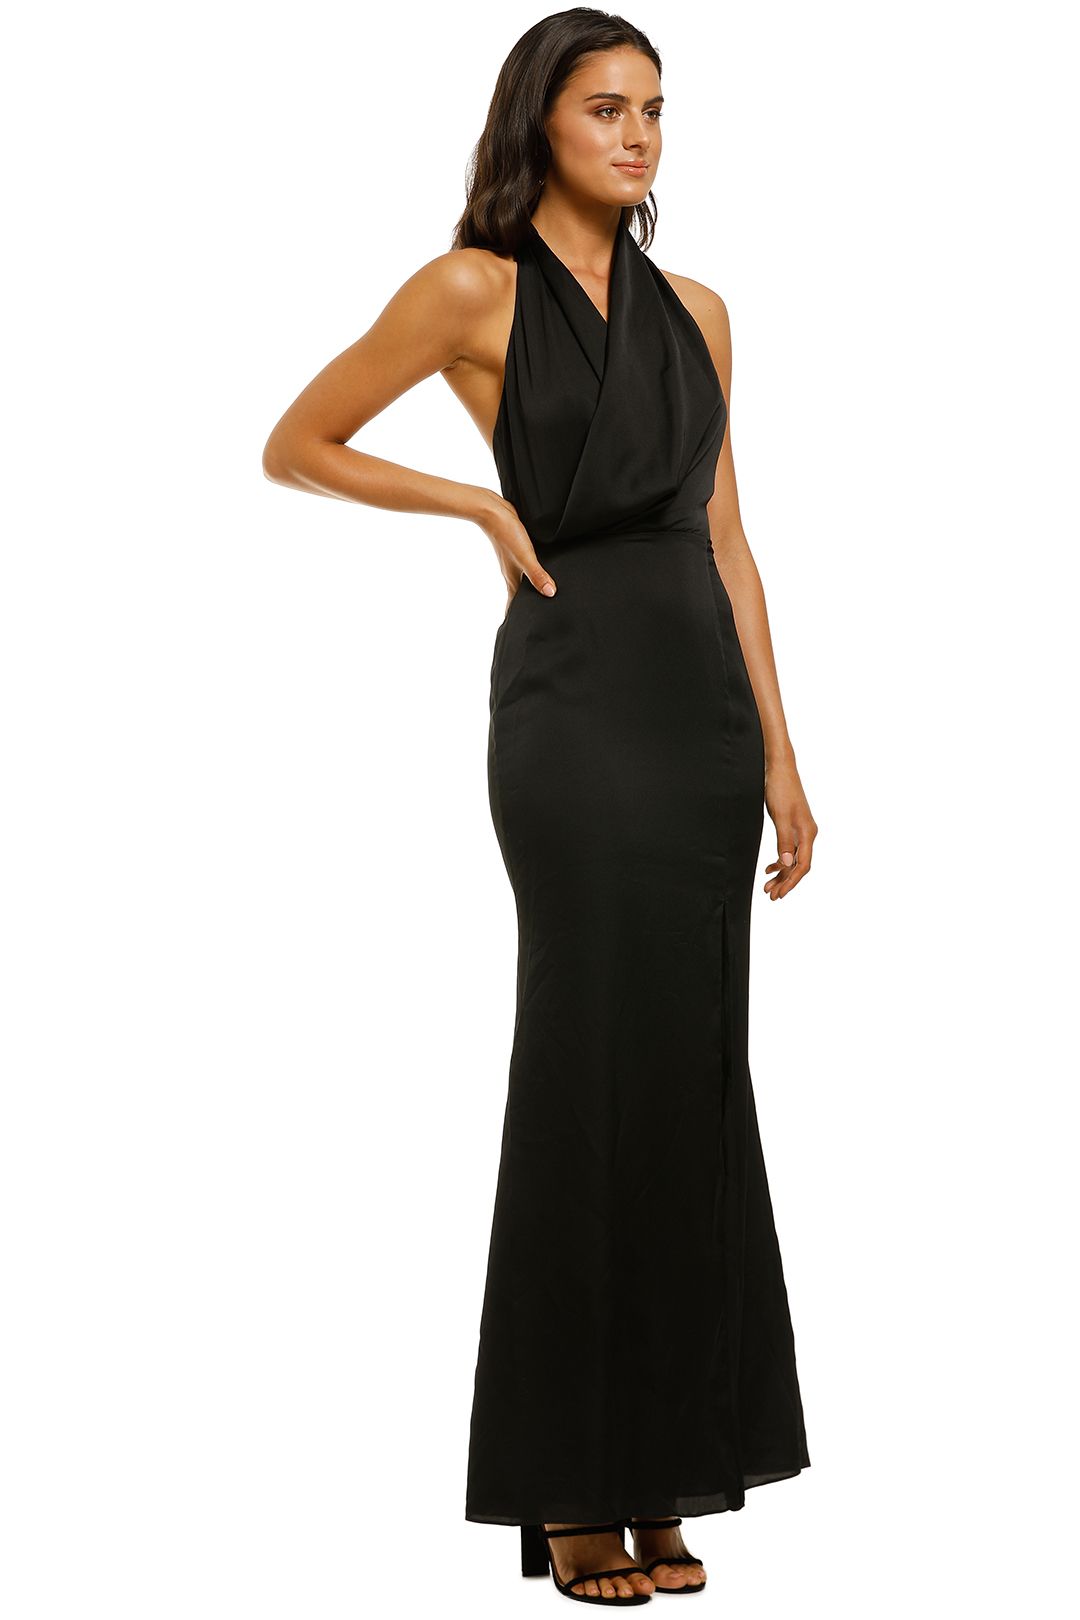 Galaxy Gown in Black by Keepsake the Label for Rent